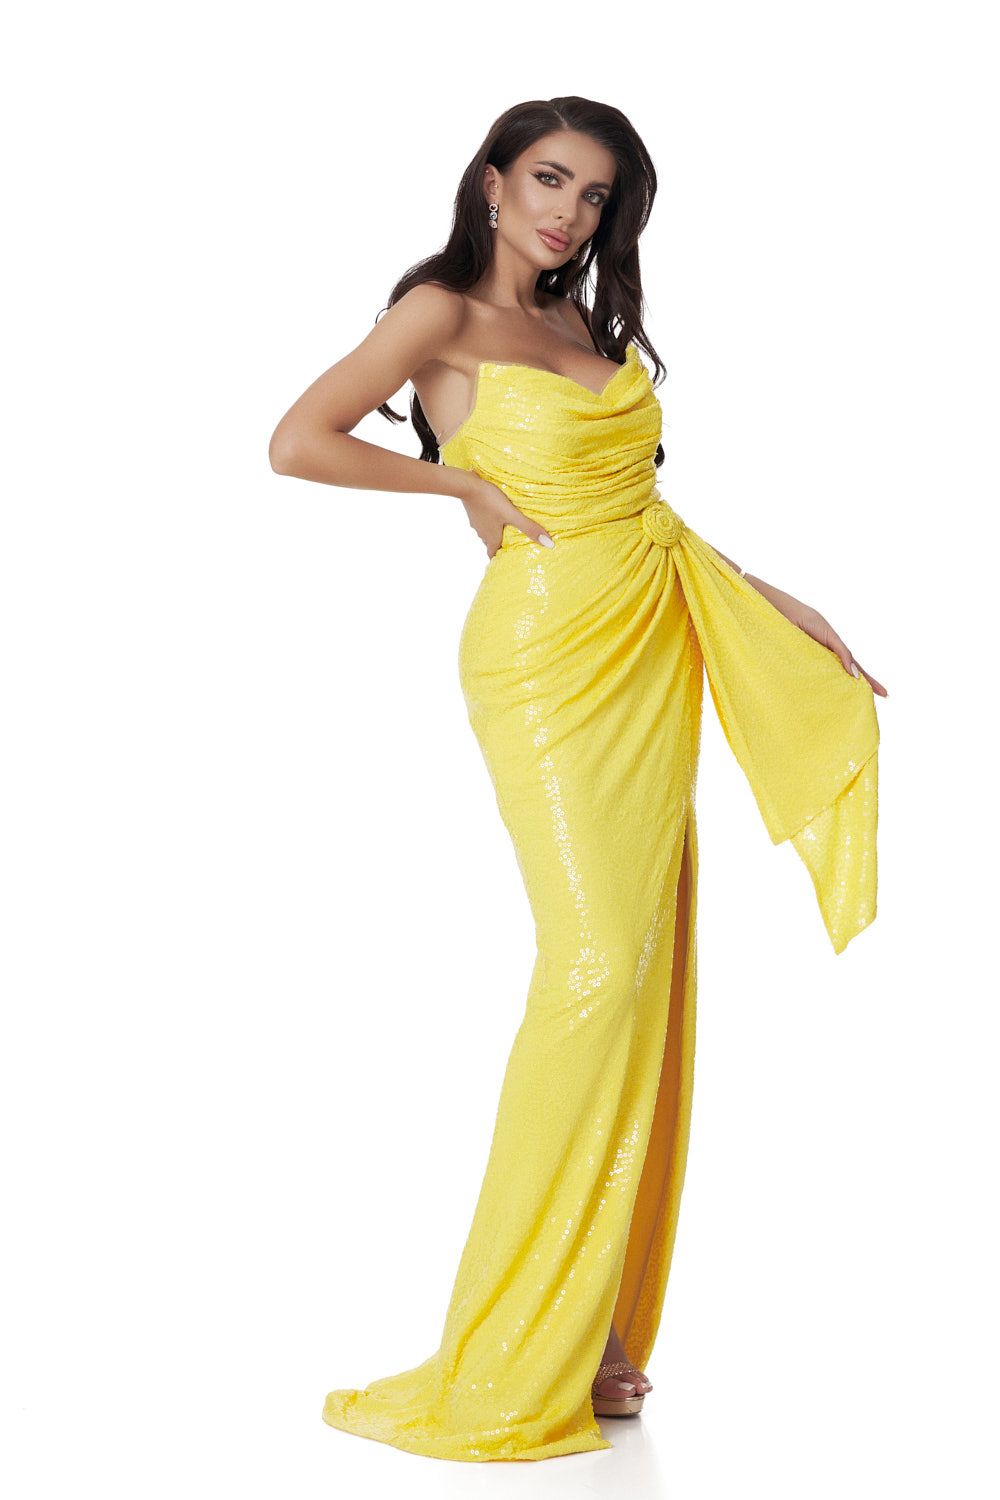 Long yellow sequin dress for women by Nicomede Bogas